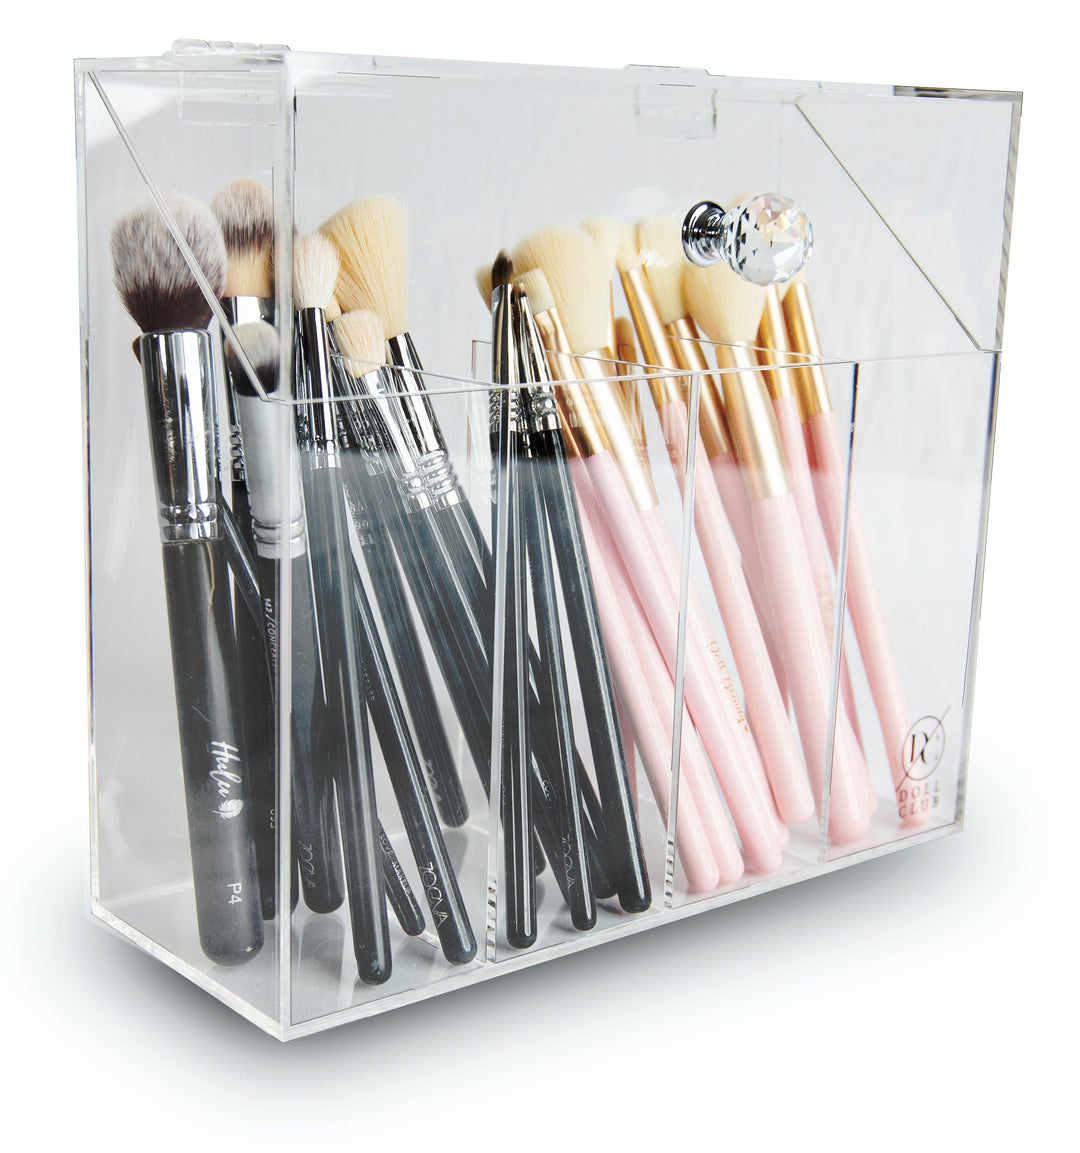 Our large 4 compartments acrylic makeup brush holder offers the perfect storage solution to not only keep a hygienic, safe space but also to display your cosmetic makeup brushes on your vanity desk in an aesthetic way. make up brush holder makeup brush organiser makeup brush storage acrylic makeup brush holder clear makeup brush holder make up brush holder with lid large makeup luvo store luvostore, Vanity collection Vanitycollection, etoile collective etoilecollective, tidy ups tidyups